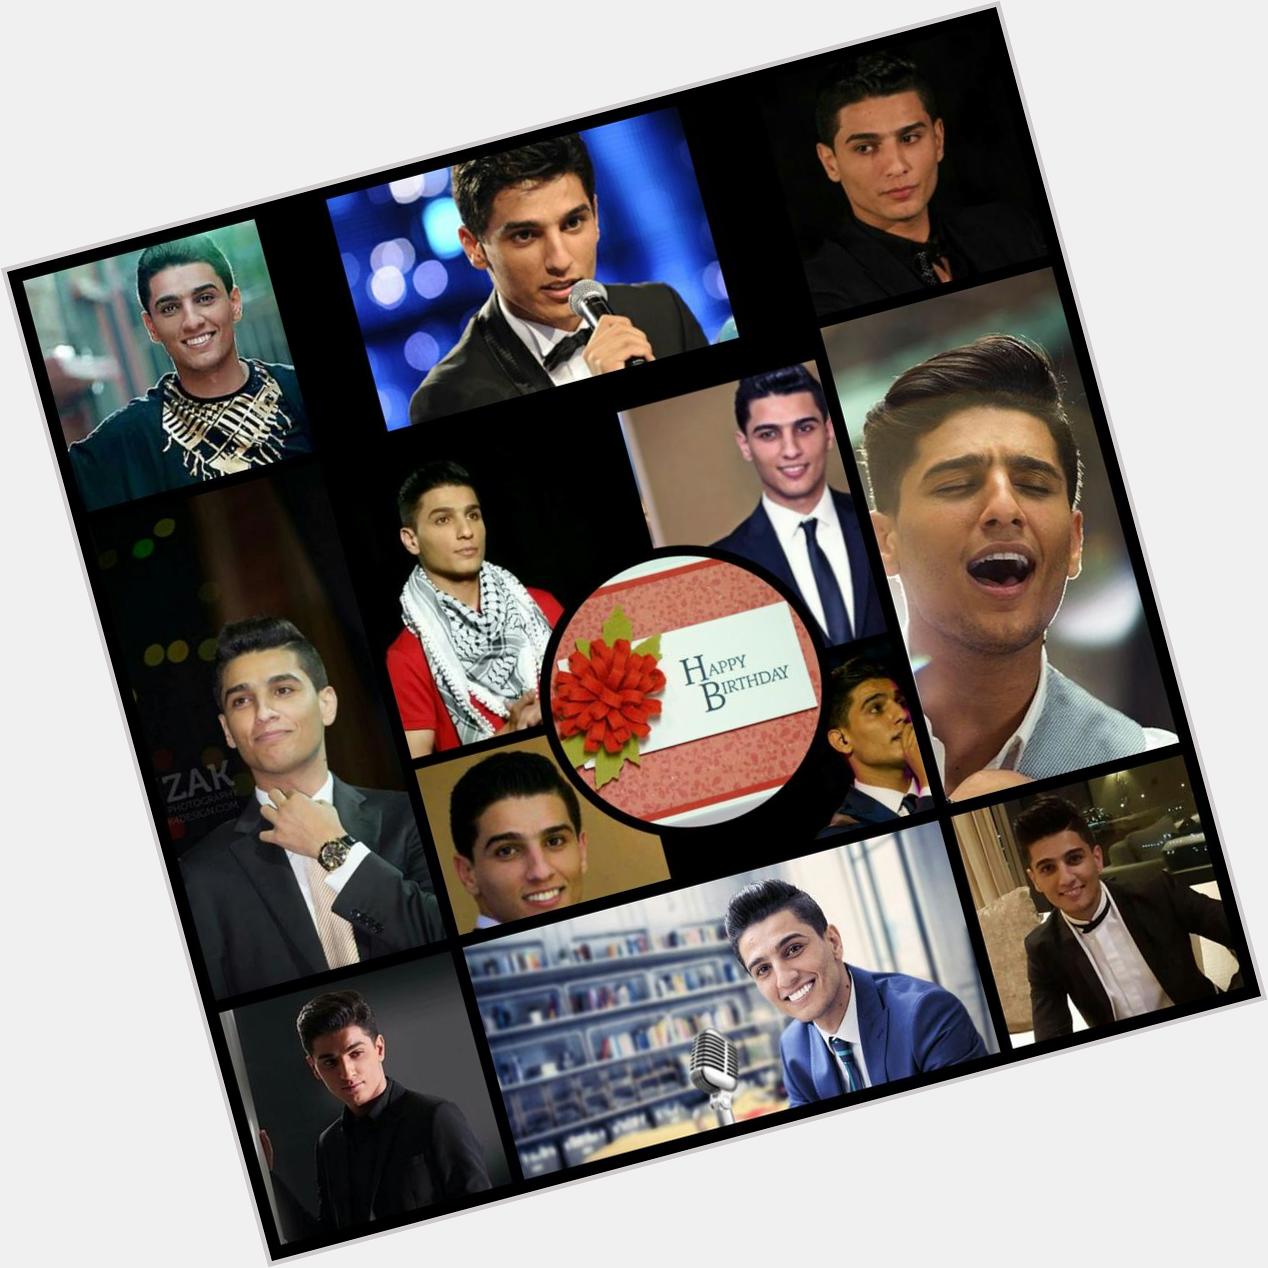  1-09-1989 Happy Birthday to Mohammed Assaf May Allah bless you May your dreams come true  